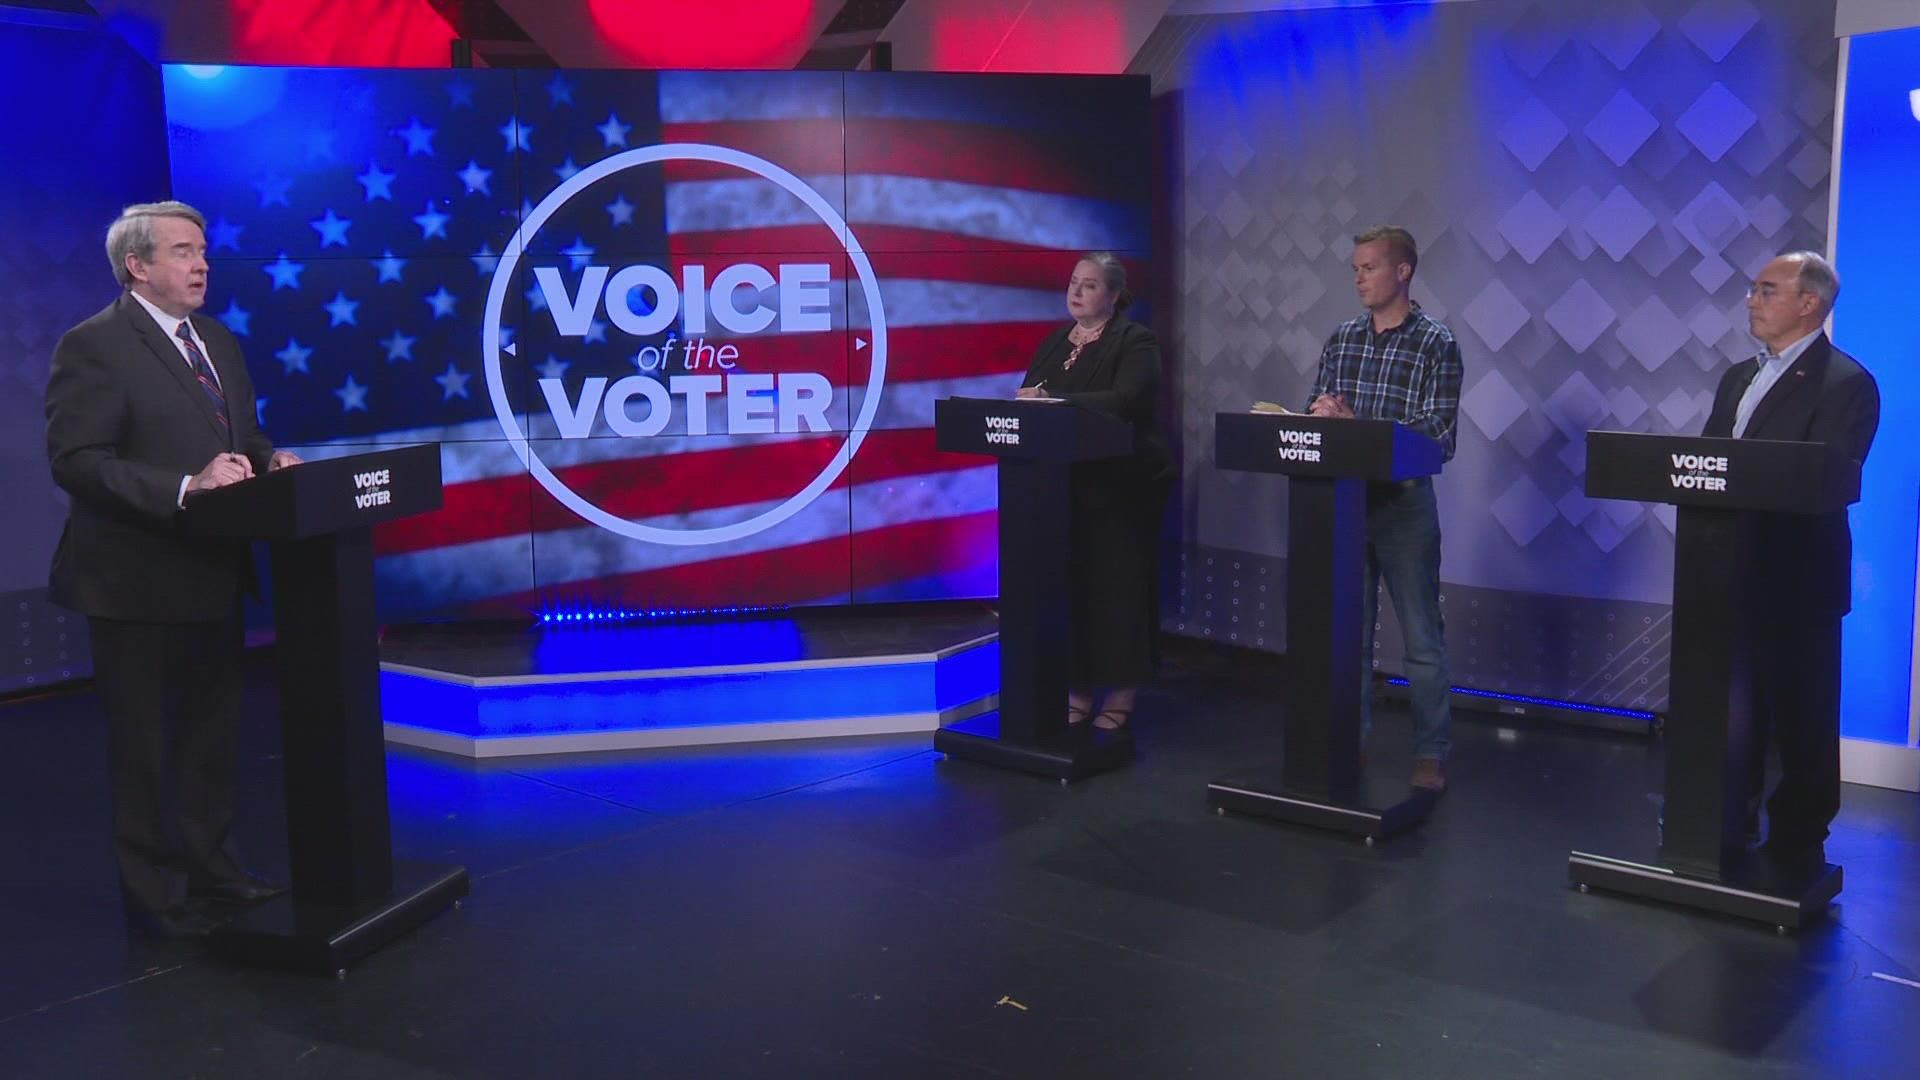 Candidates running for a seat in the U.S. House of Representatives from Maine's 2nd Congressional District are letting their voices be heard.